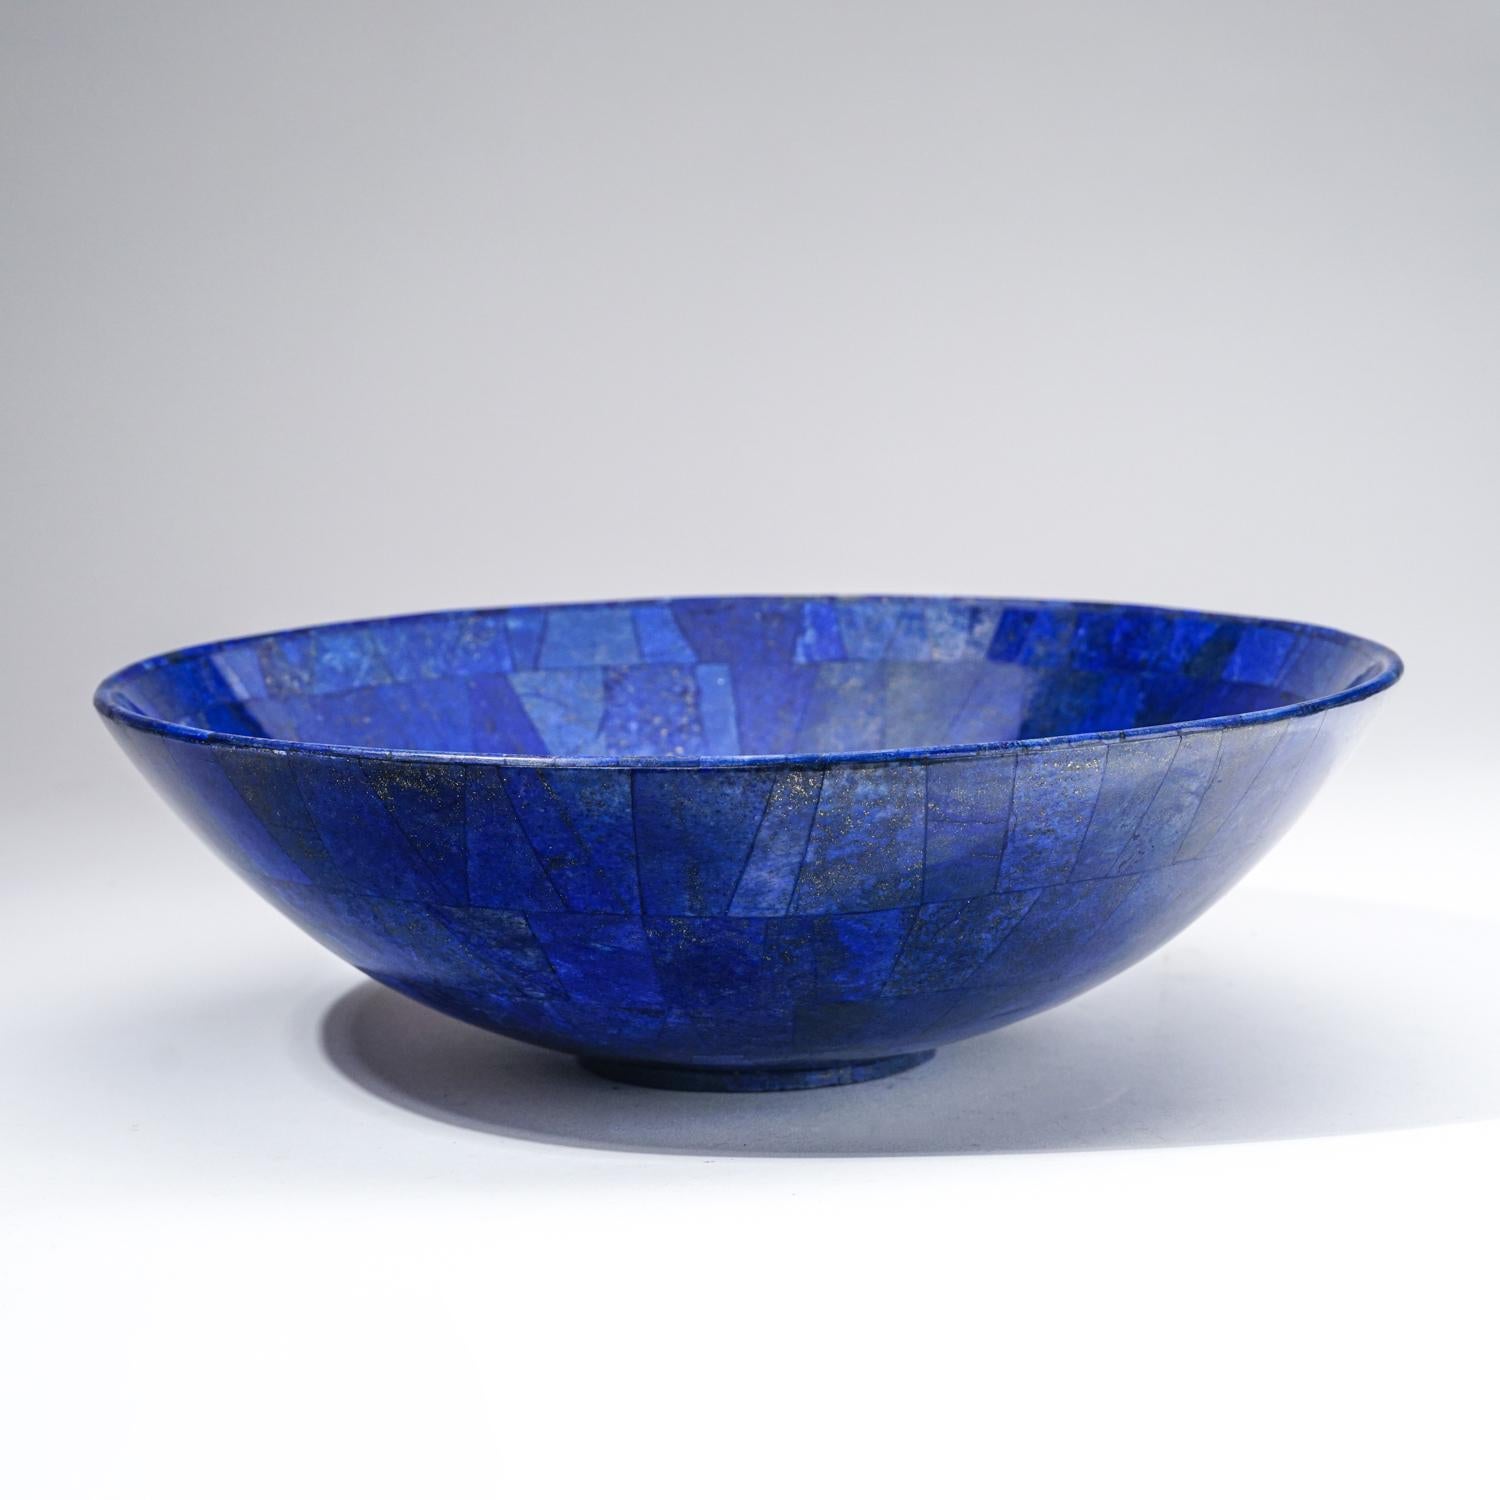 Contemporary Genuine Polished Lapis Lazuli Bowl (3 lbs) For Sale